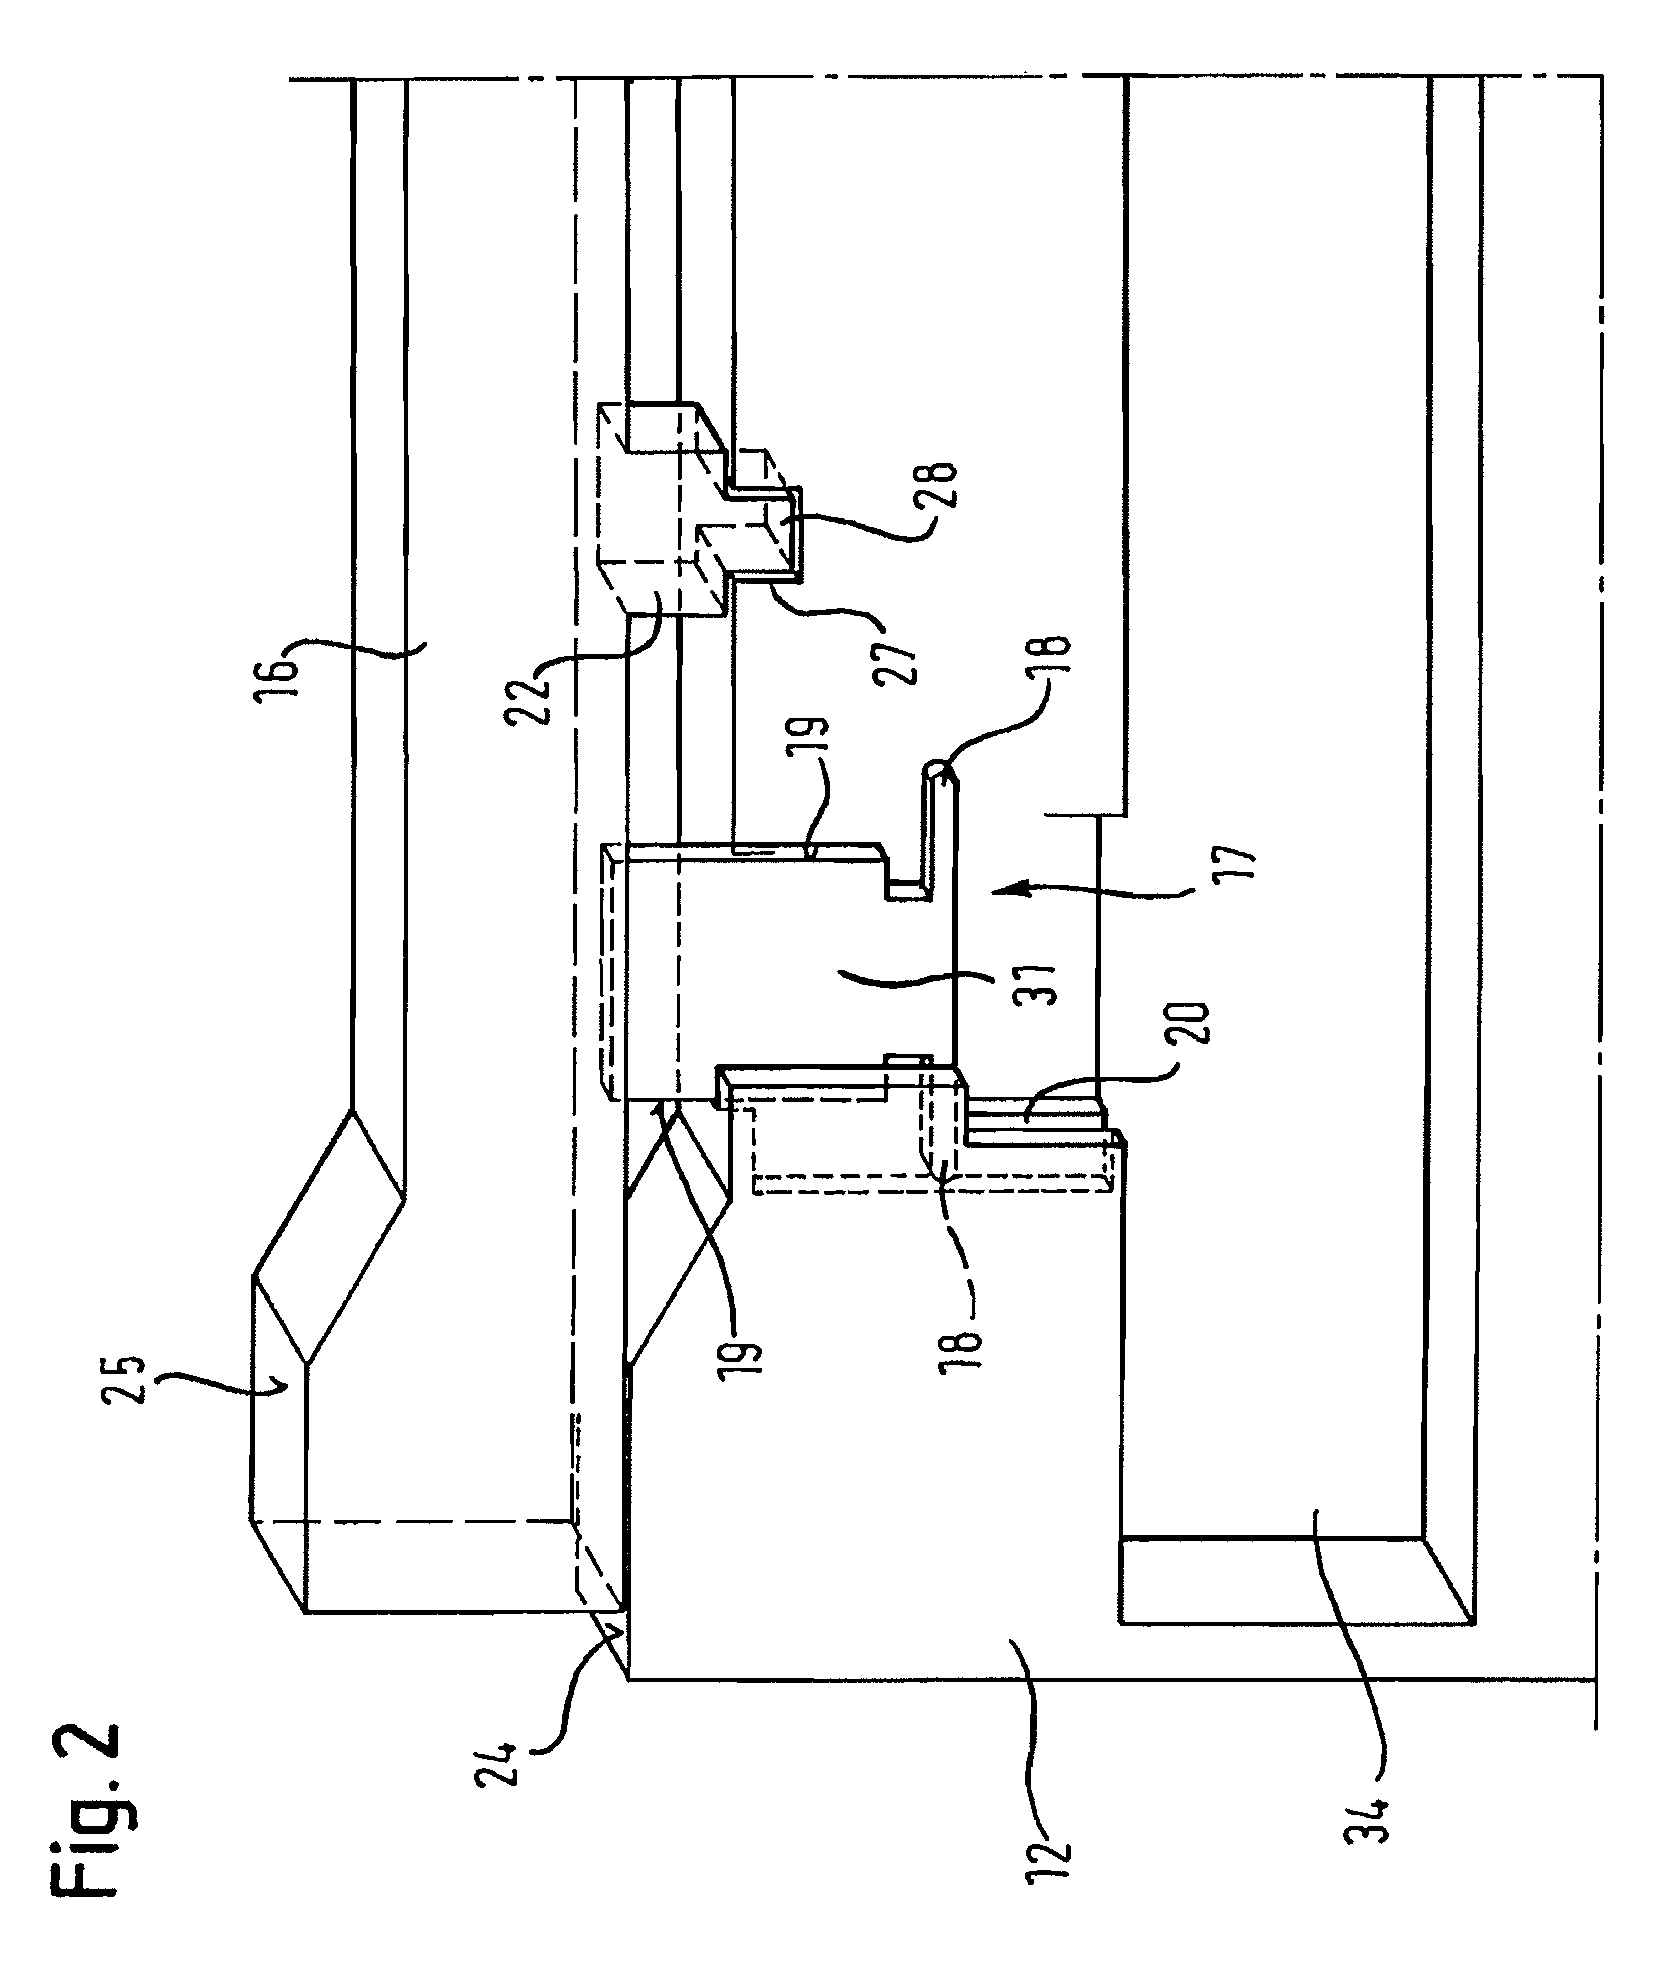 Transport container system with sidewall attachment elements for increasing the transport capacity